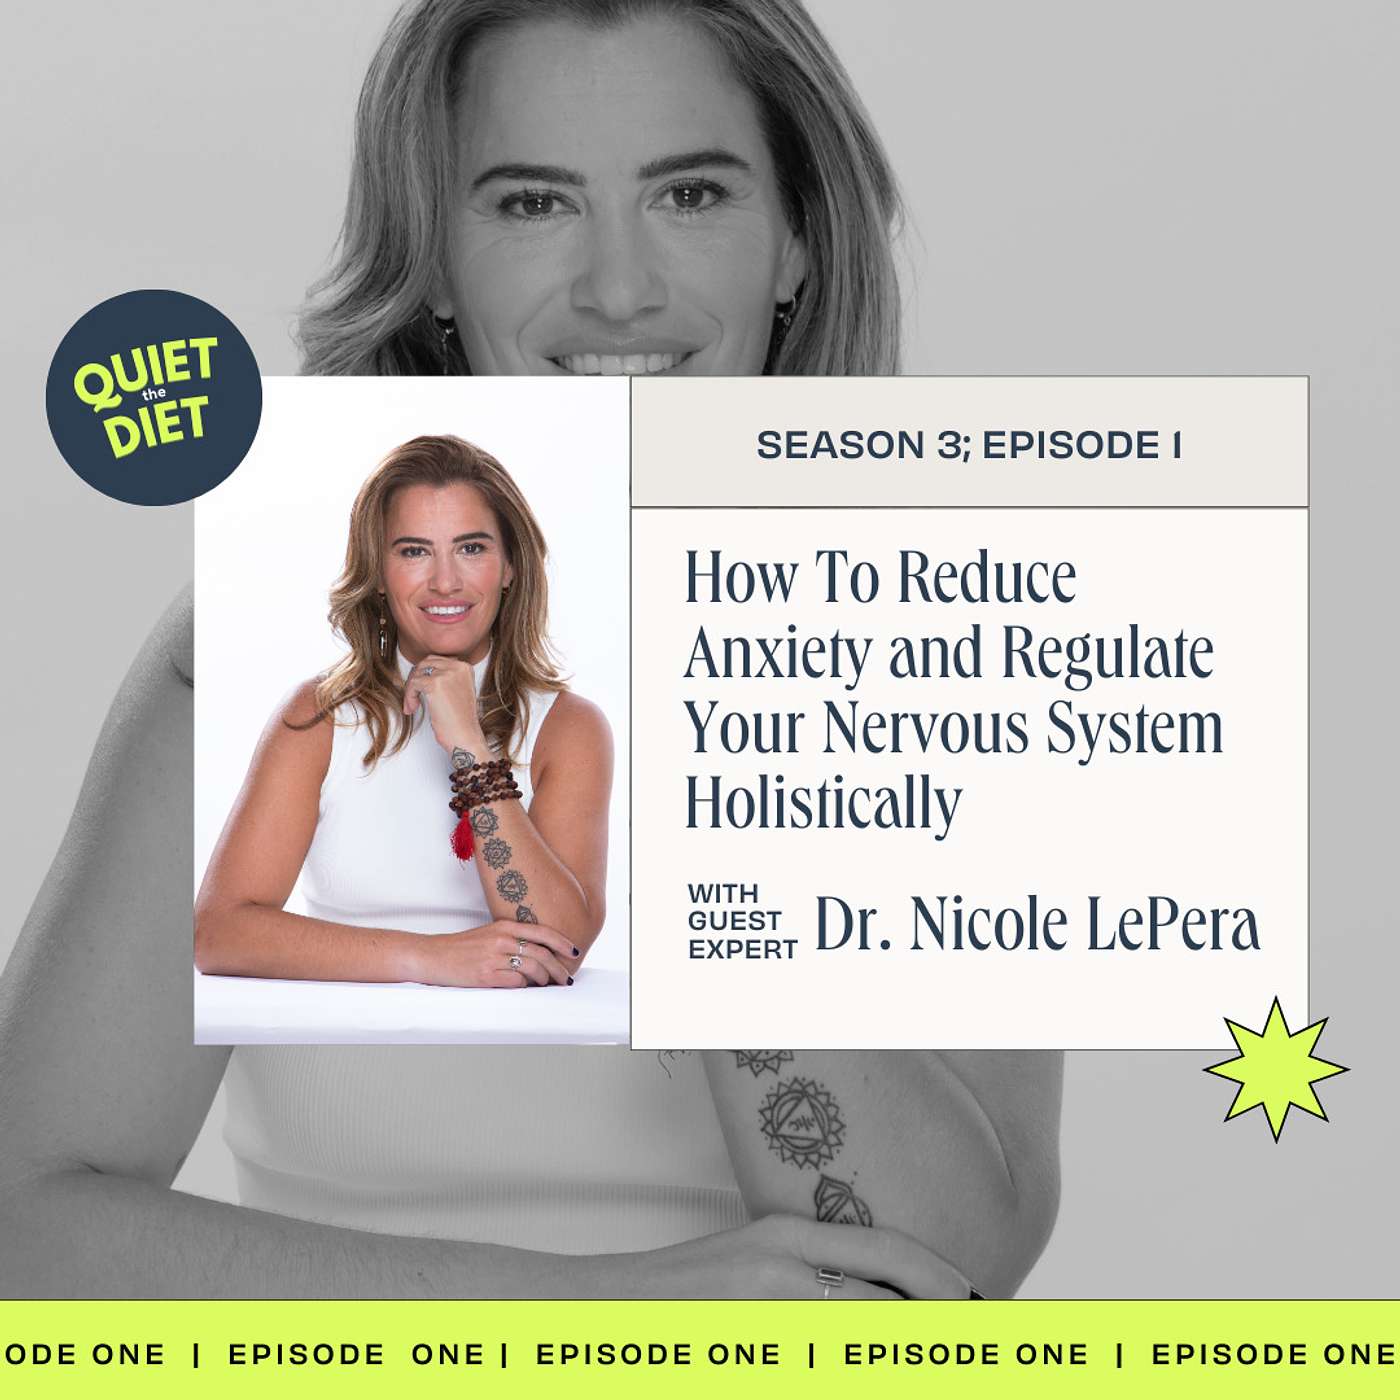 How To Reduce Anxiety and Regulate Your Nervous System Holistically With Dr. Nicole LePera (@the.holistic.psychologist)